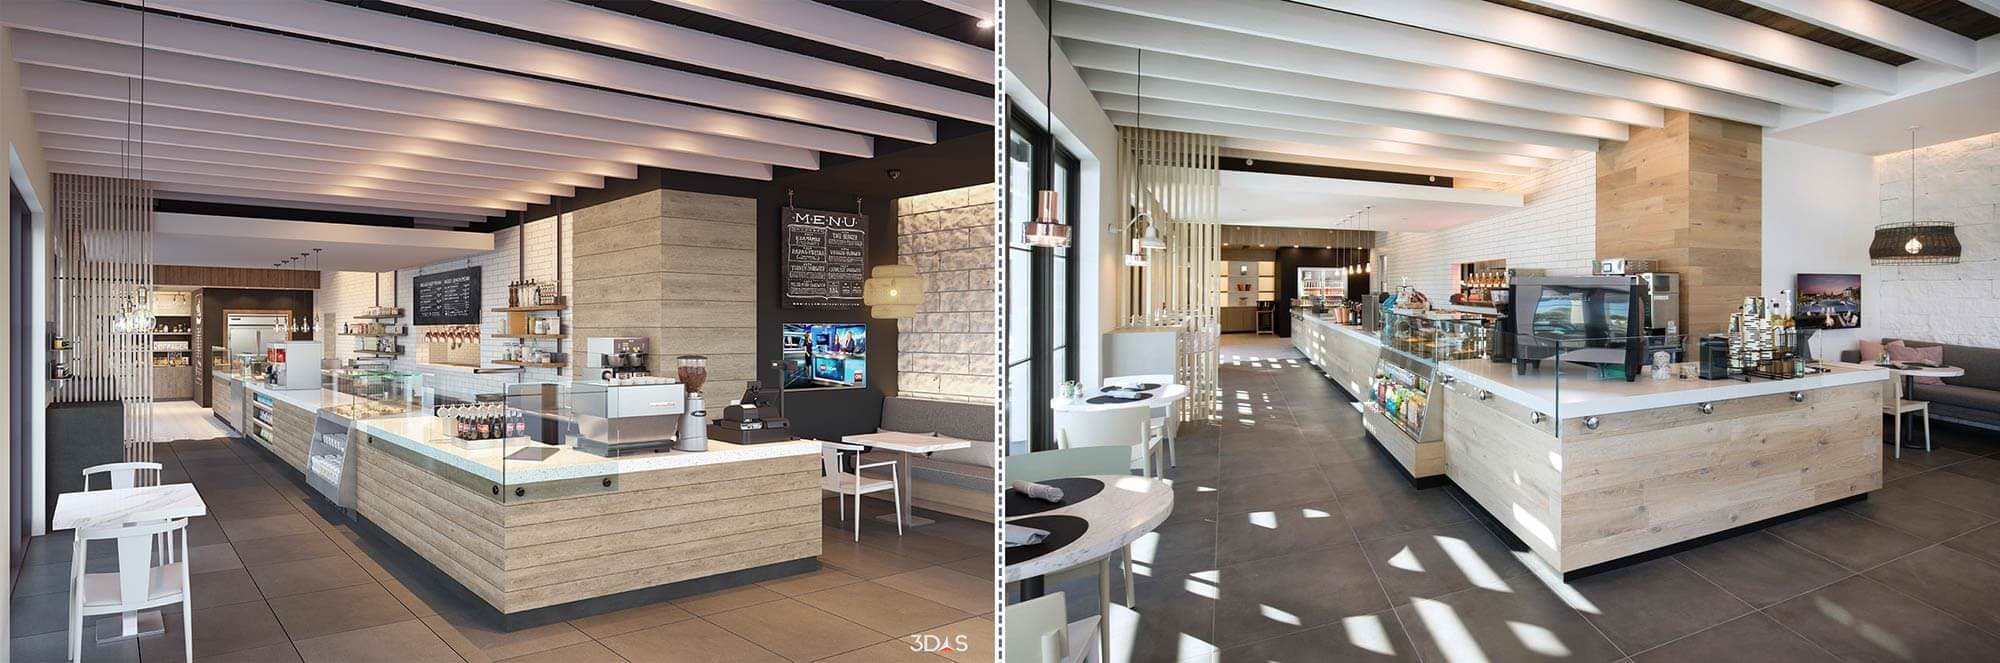 Bistro 3D Rendering (Left) and Photo (Right) in Kalea Bay, Naples, Florida